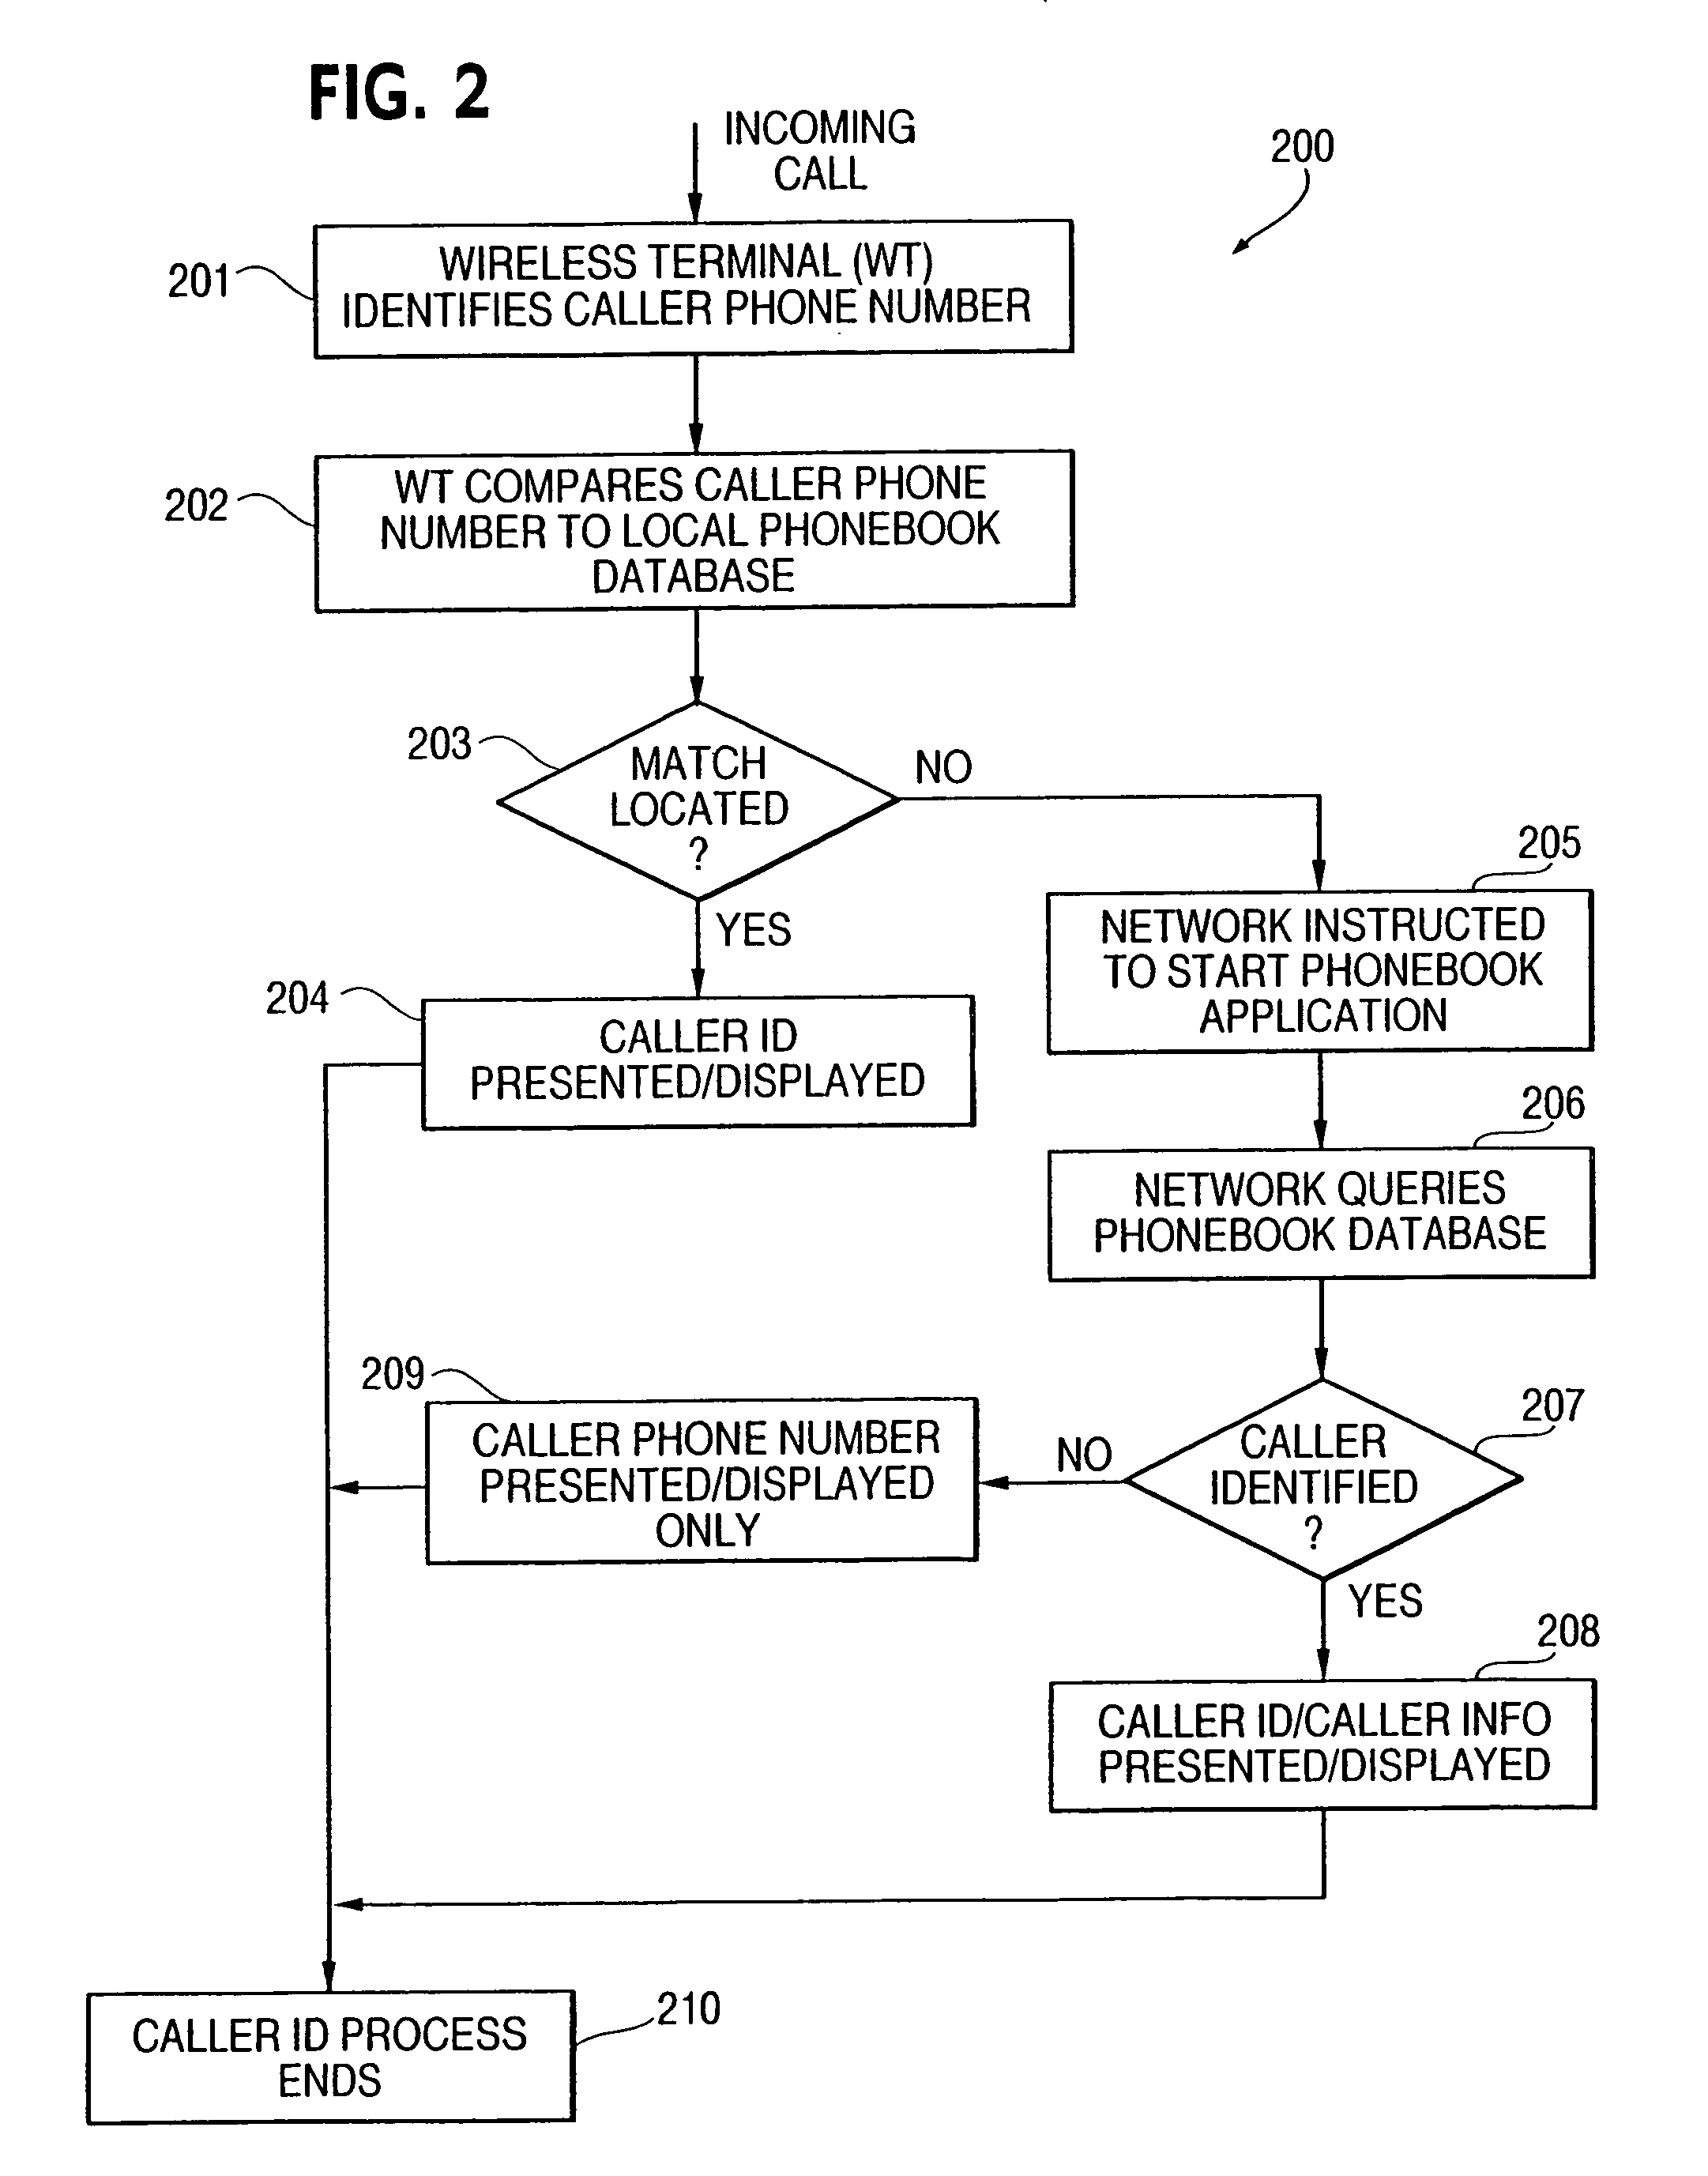 Method and system for making accessible wirelessly a network phonebook and journal database